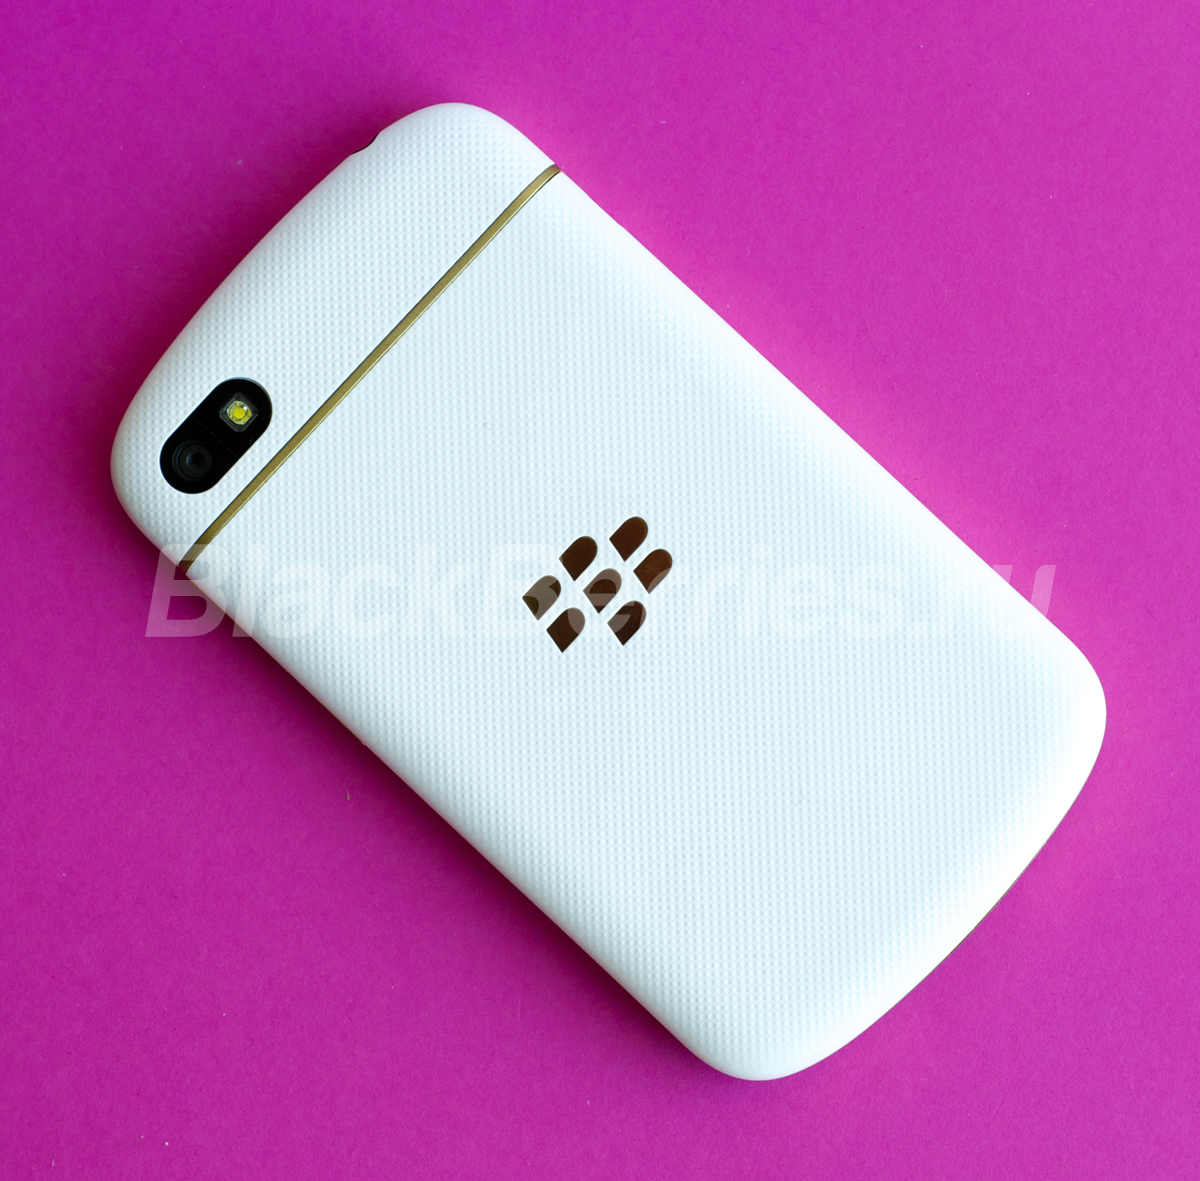 BlackBerry-Q10-Special-Edition-40